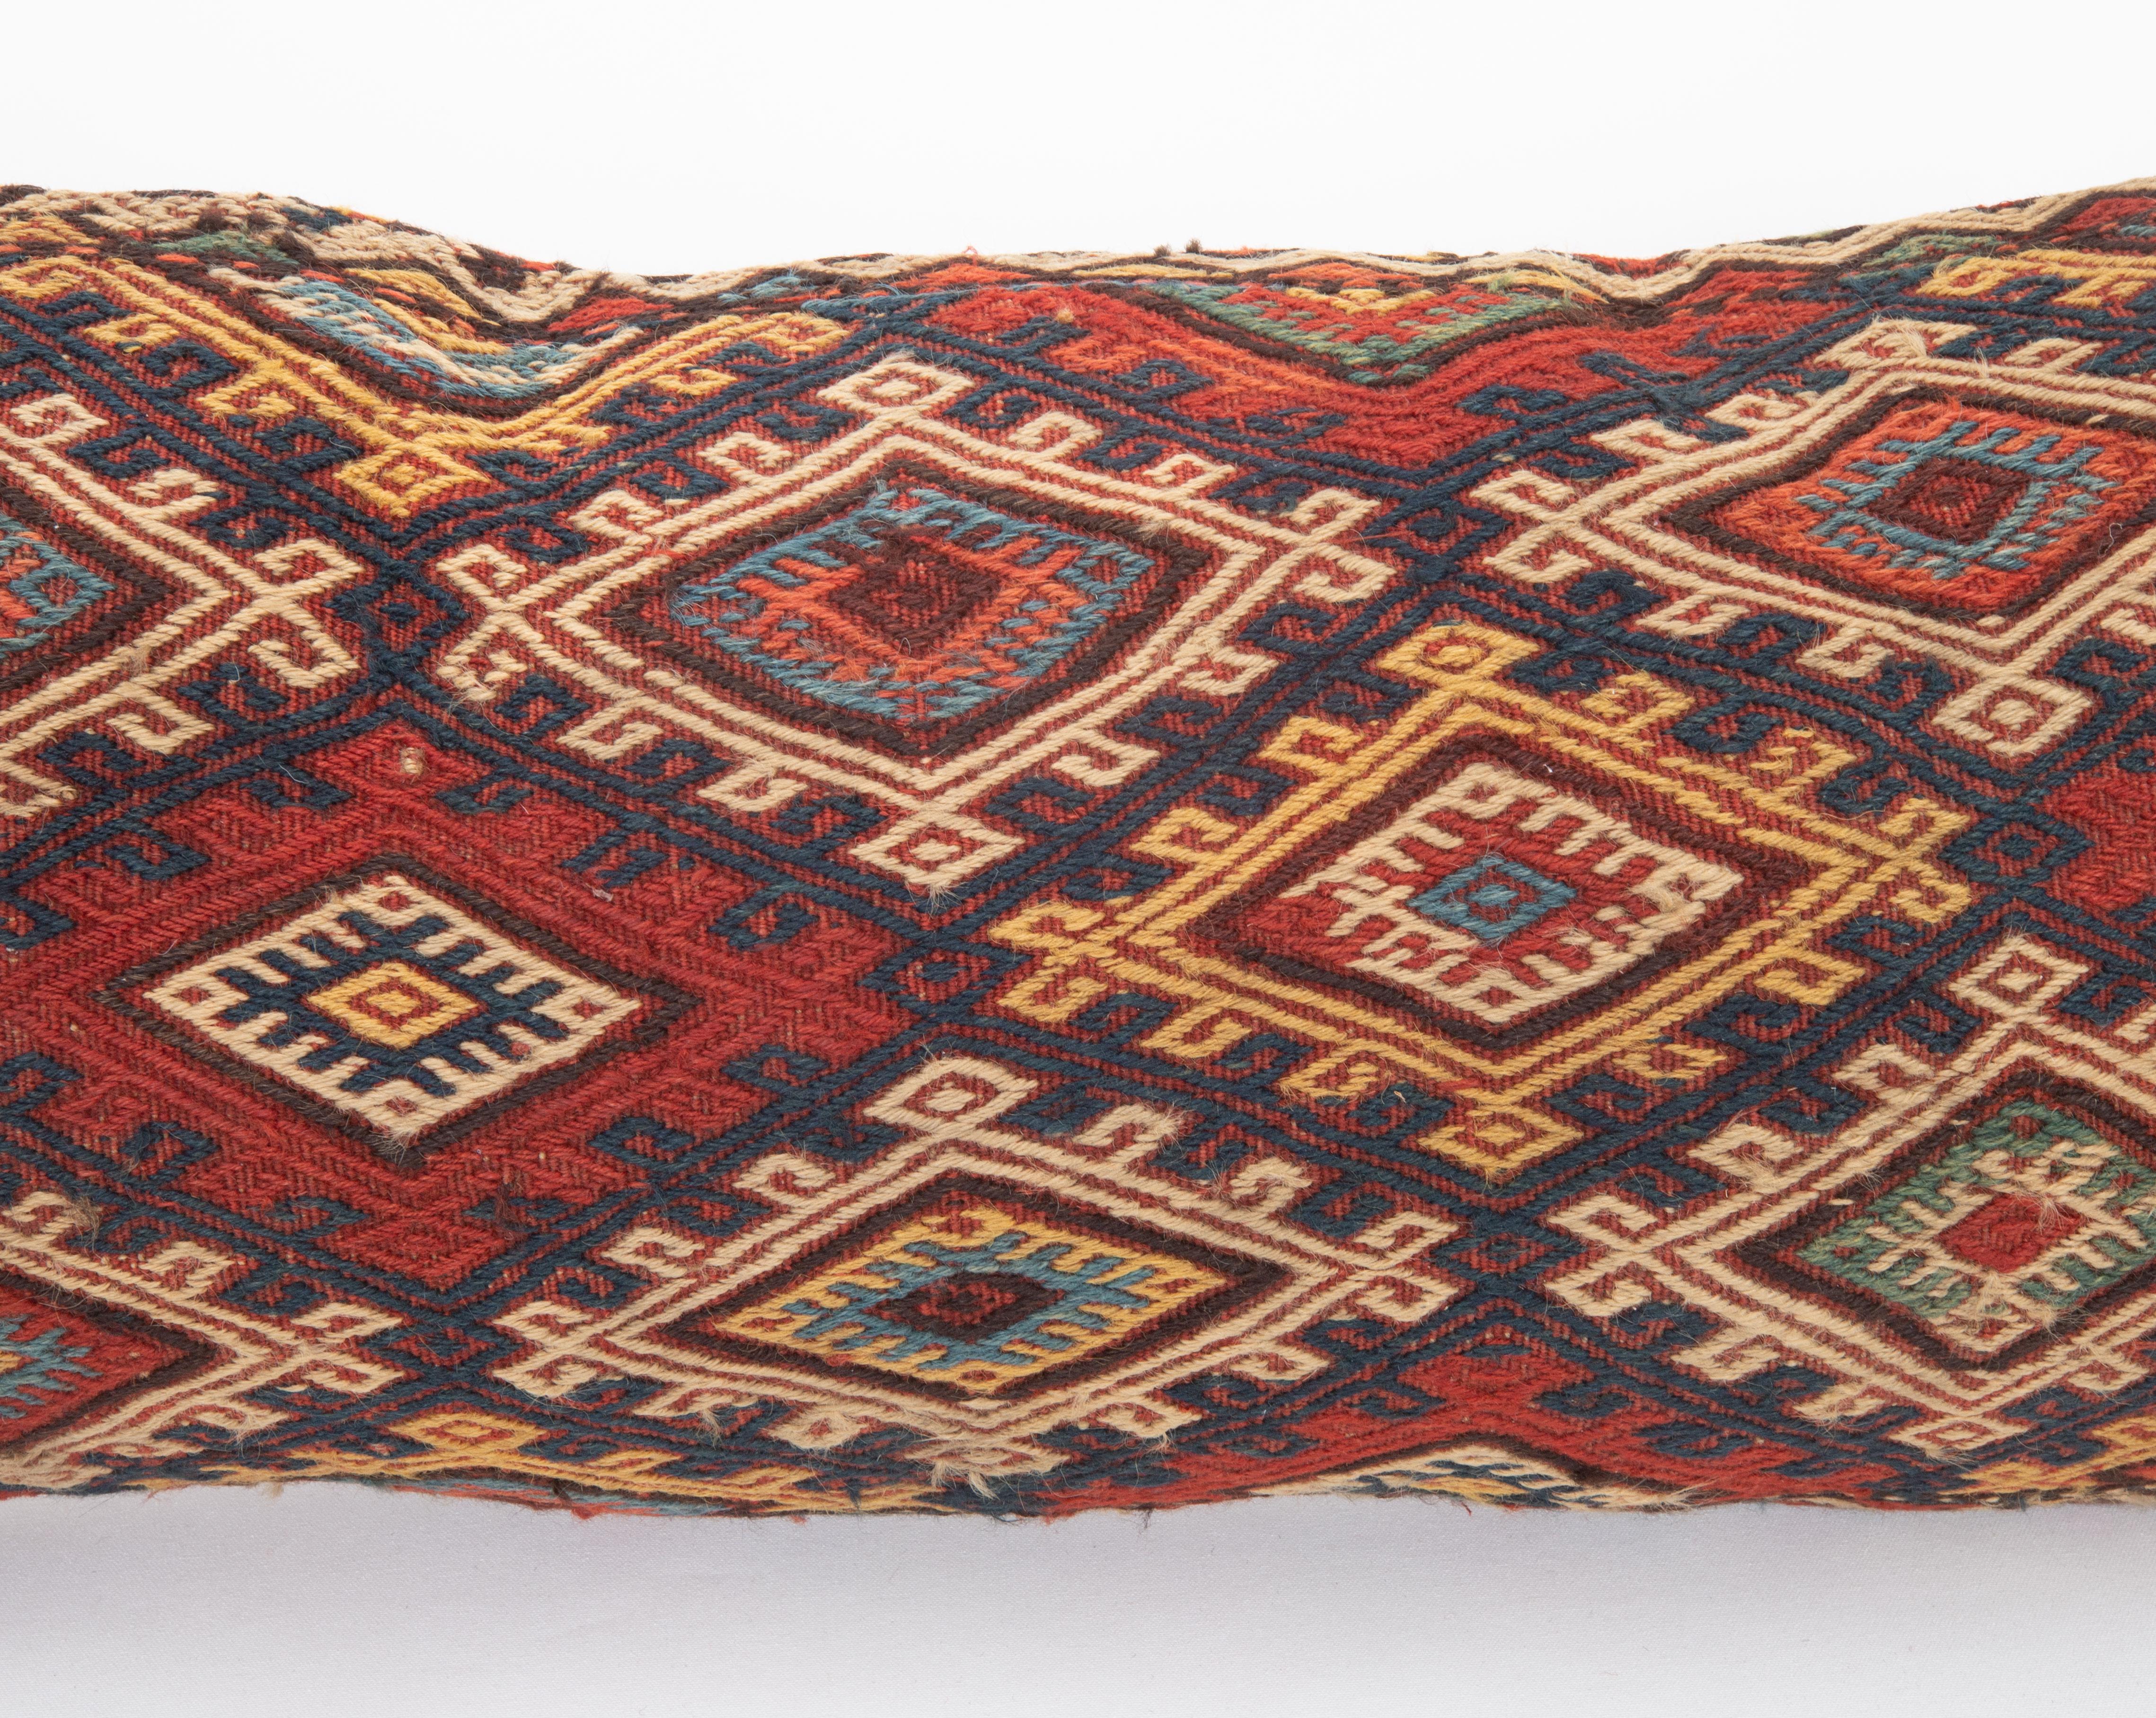 Azerbaijani Pillow Cover Fashioned from an Antique Caucasian Mafrash ( storage Bag ) Panel For Sale